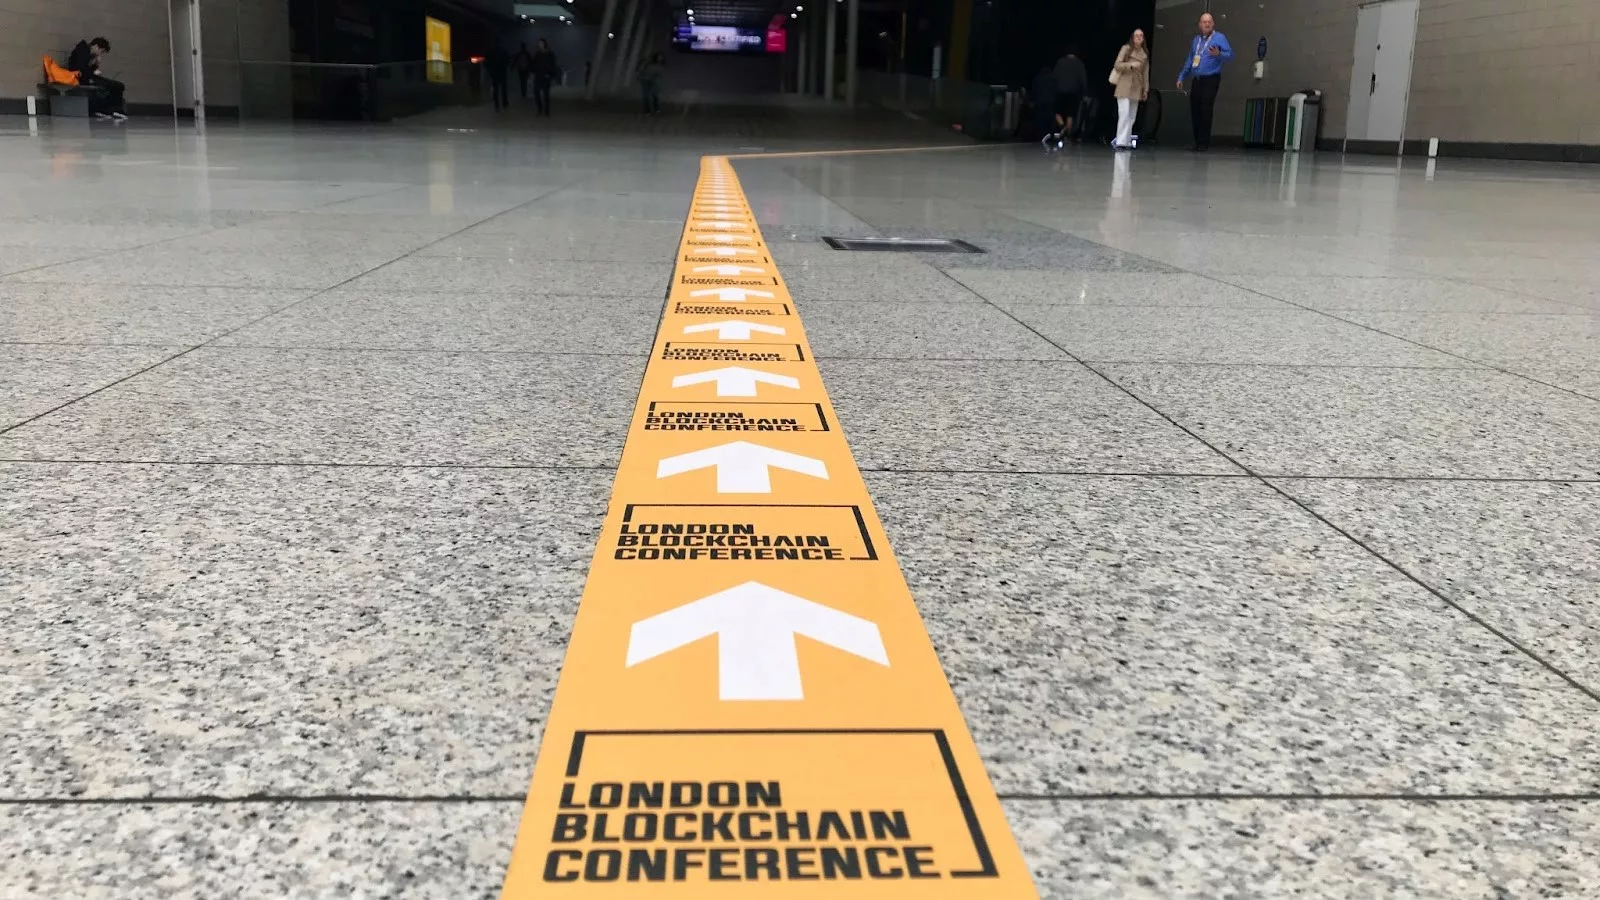 London Blockchain Conference signage on the floor